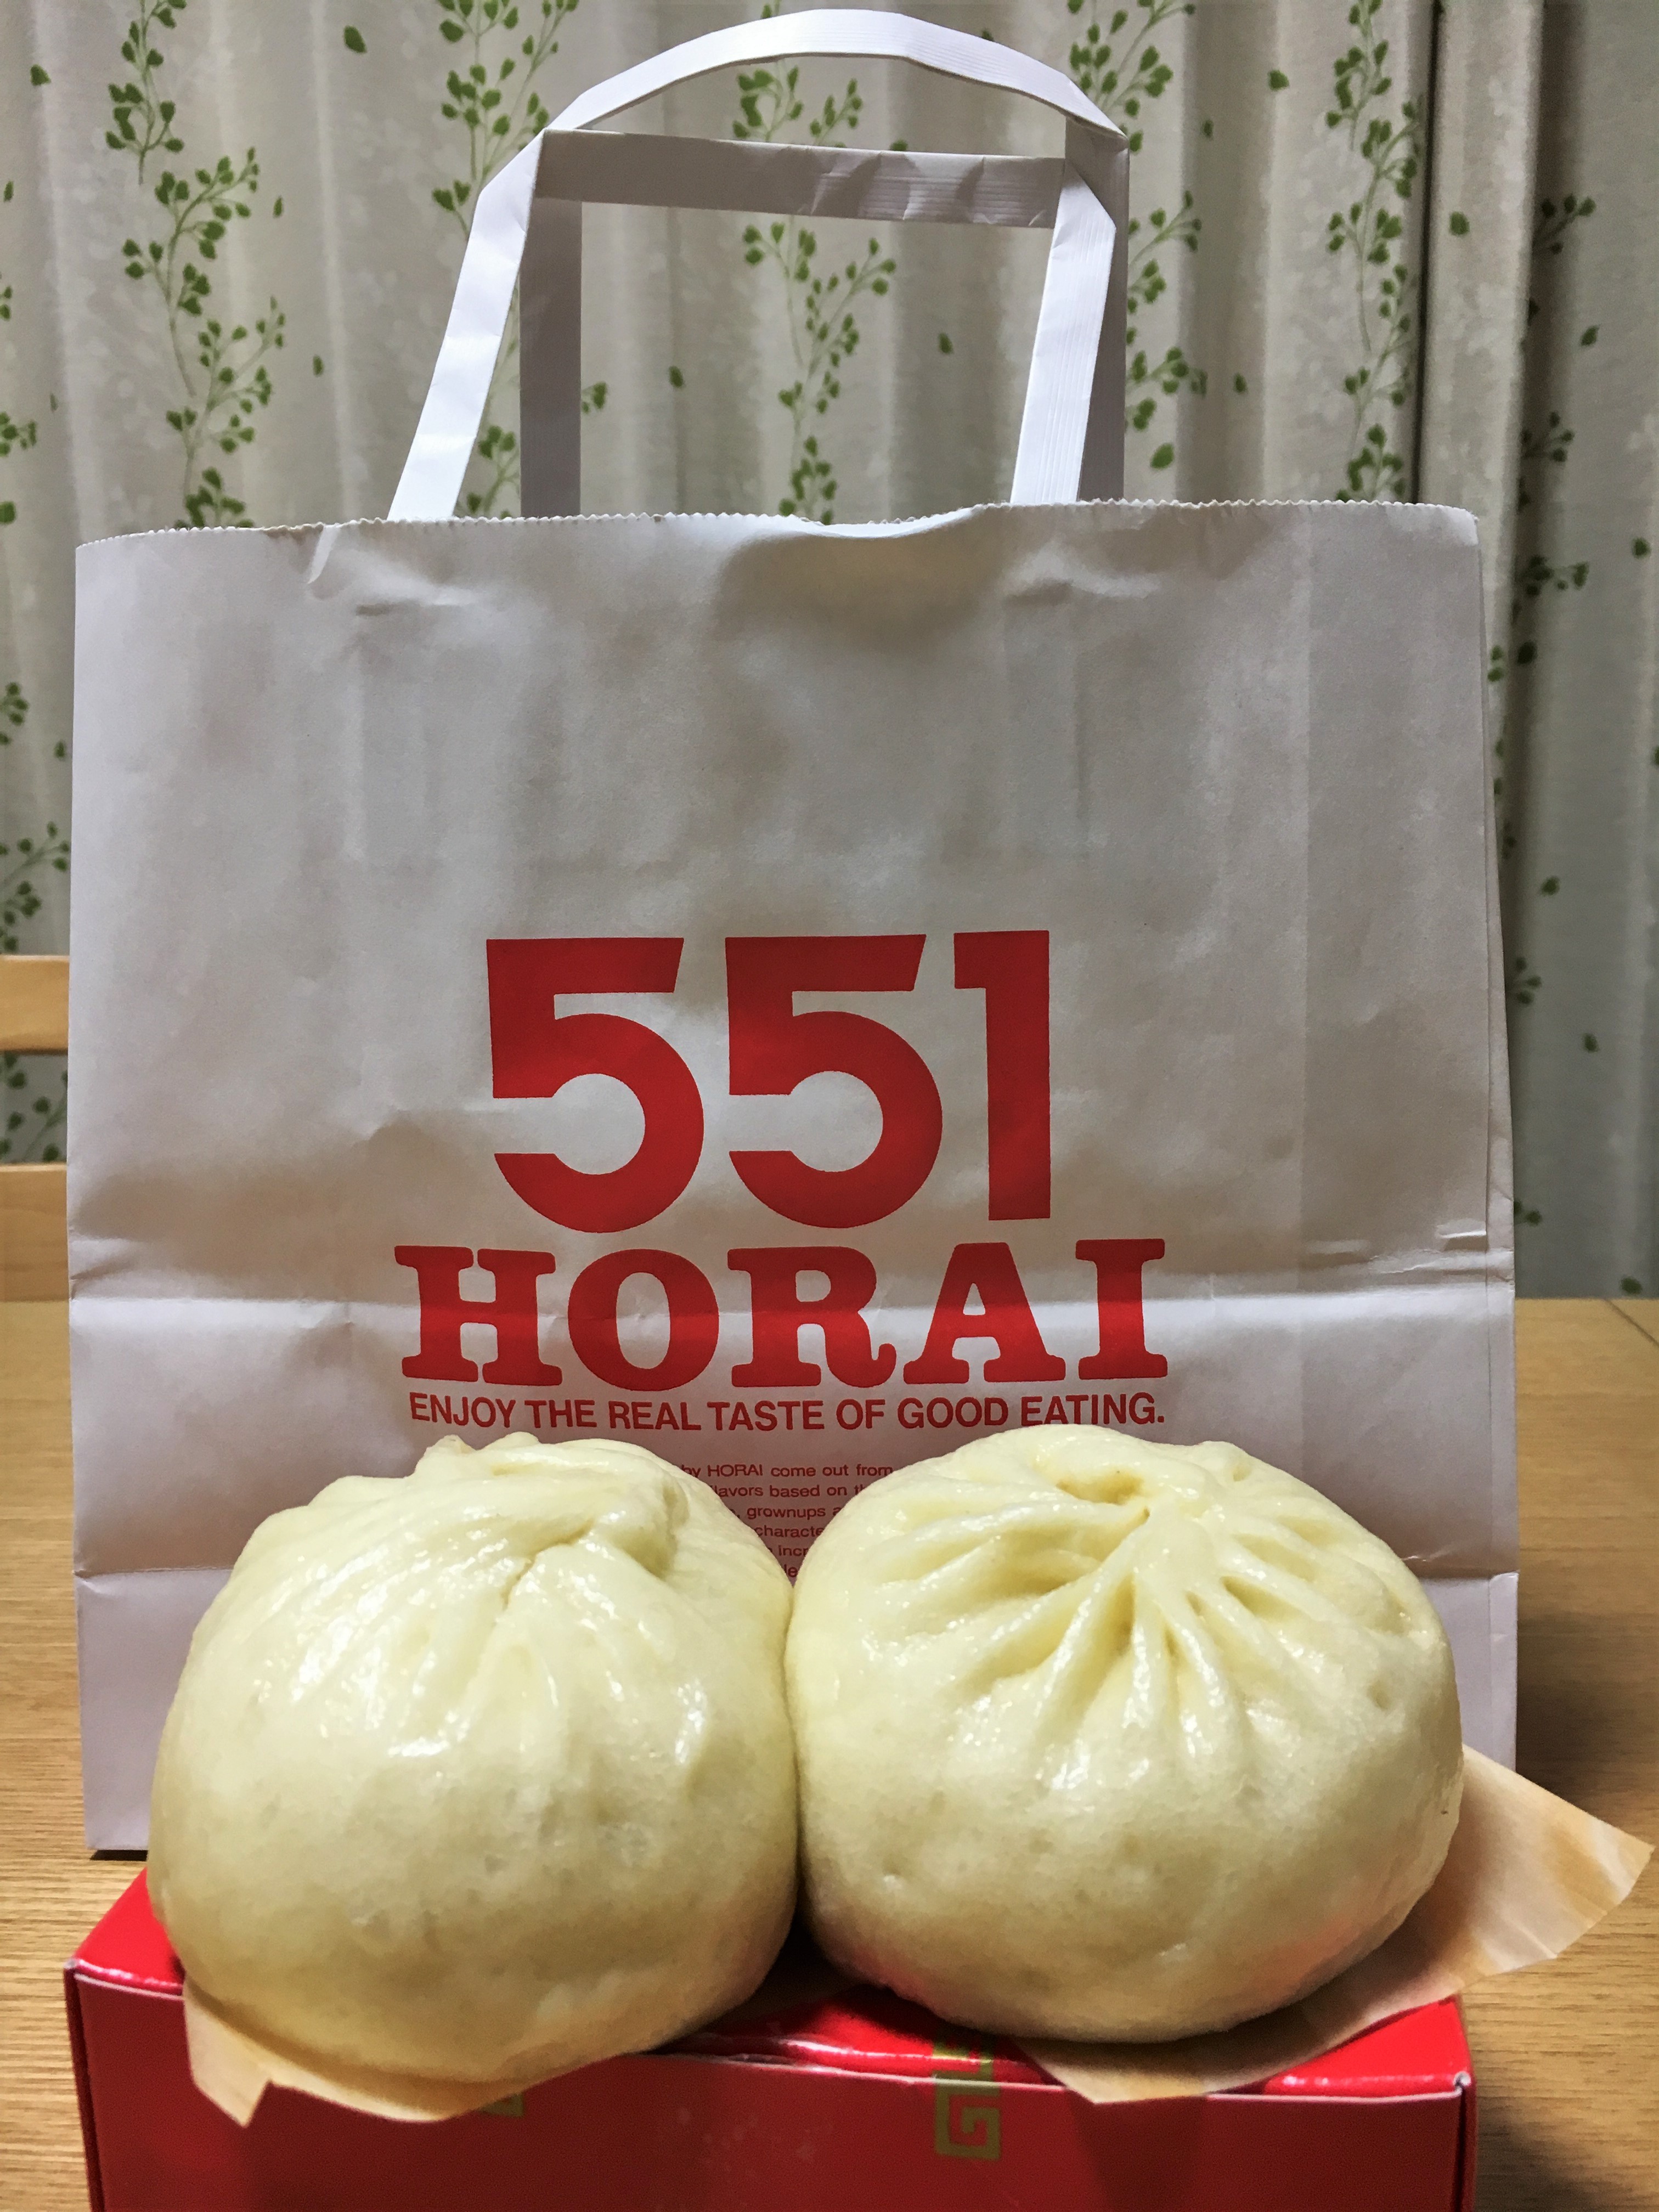 red and white bag from 551 Horai with two big fluffy butaman on red box